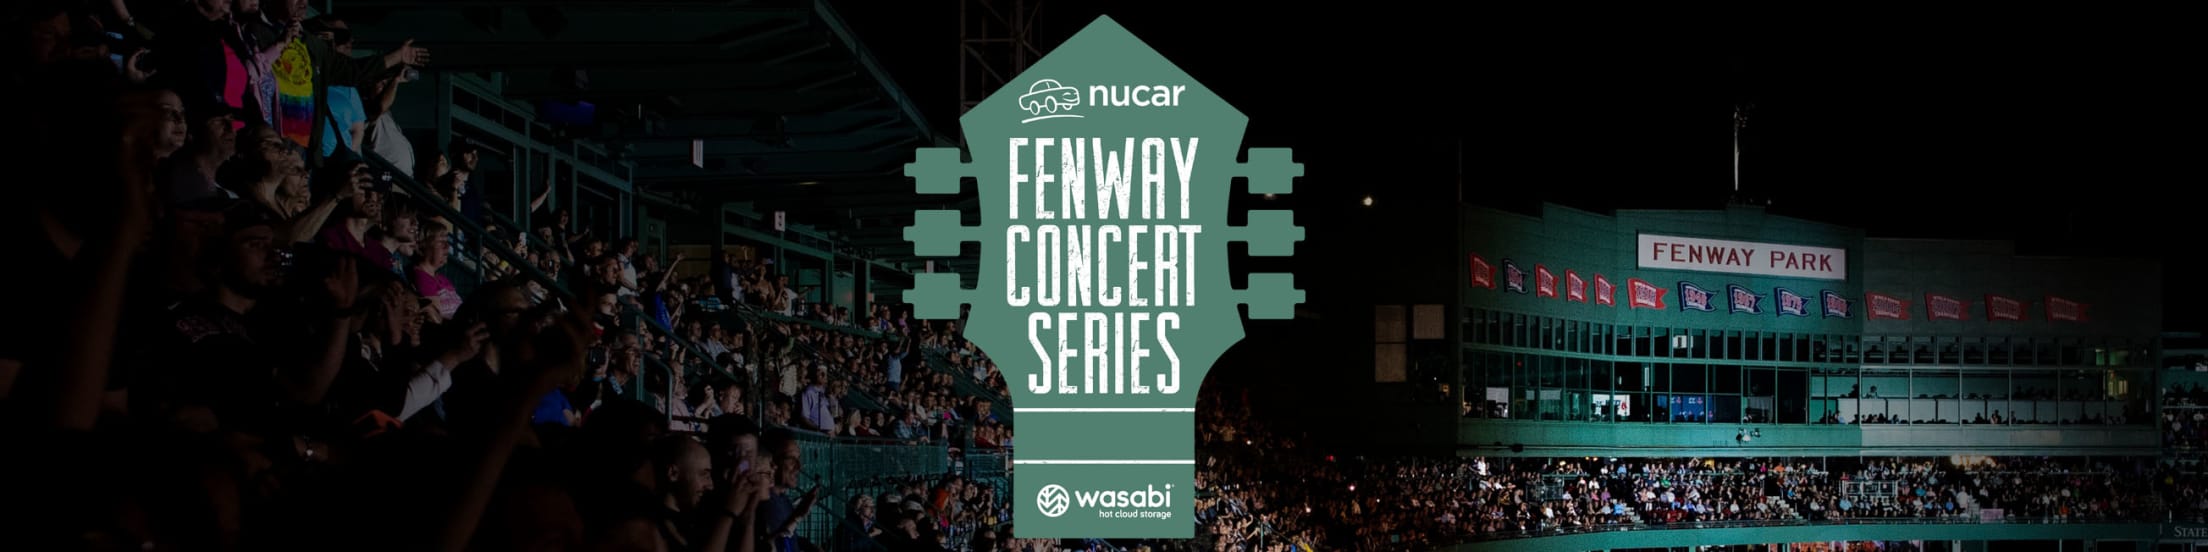 Fenway Park Seating Map For Concerts Matttroy